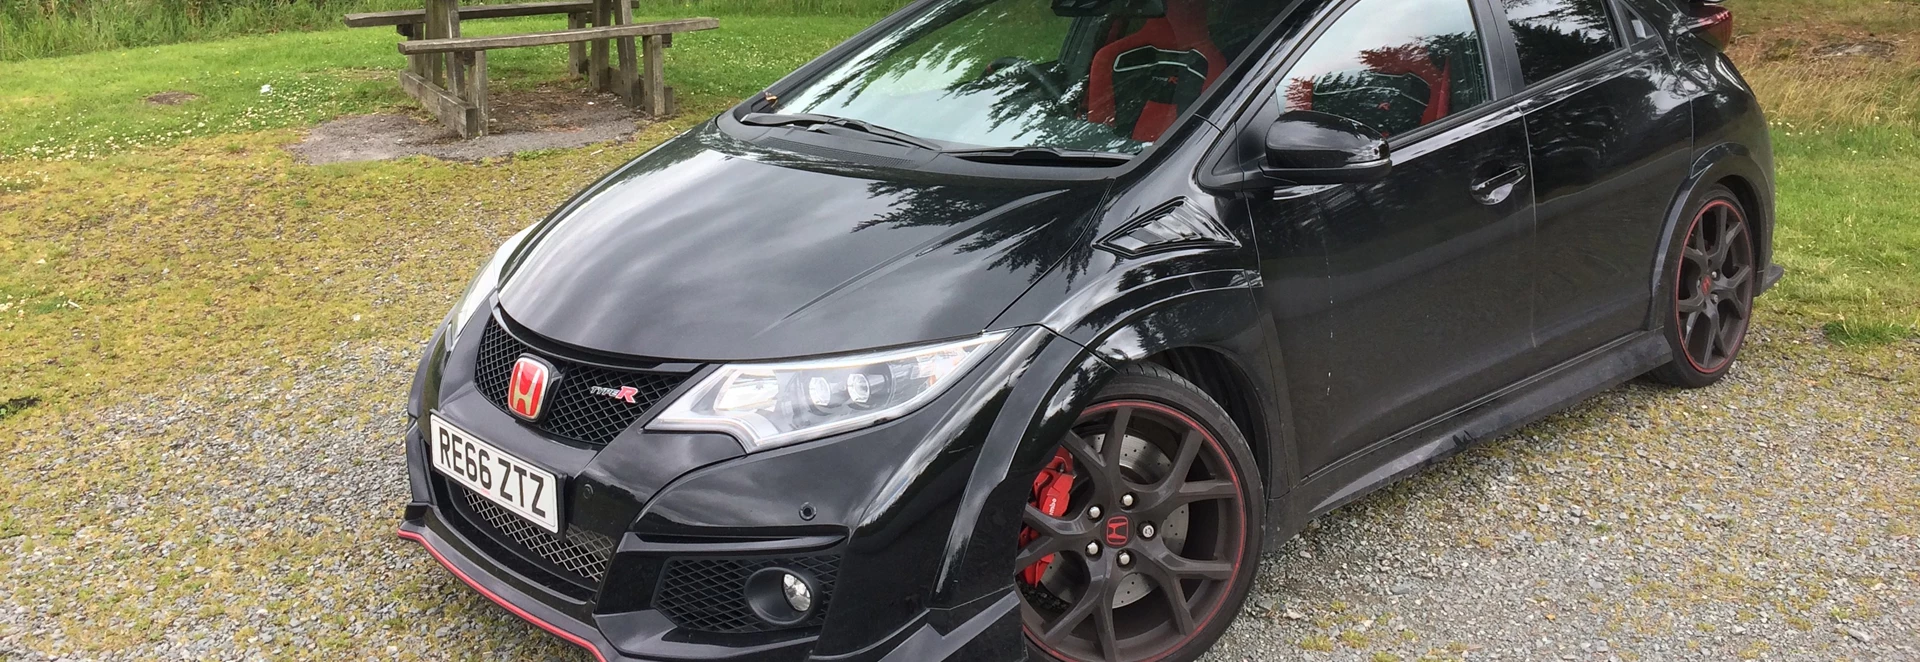 Honda Civic Type R long term update: Best mods for the FK2 